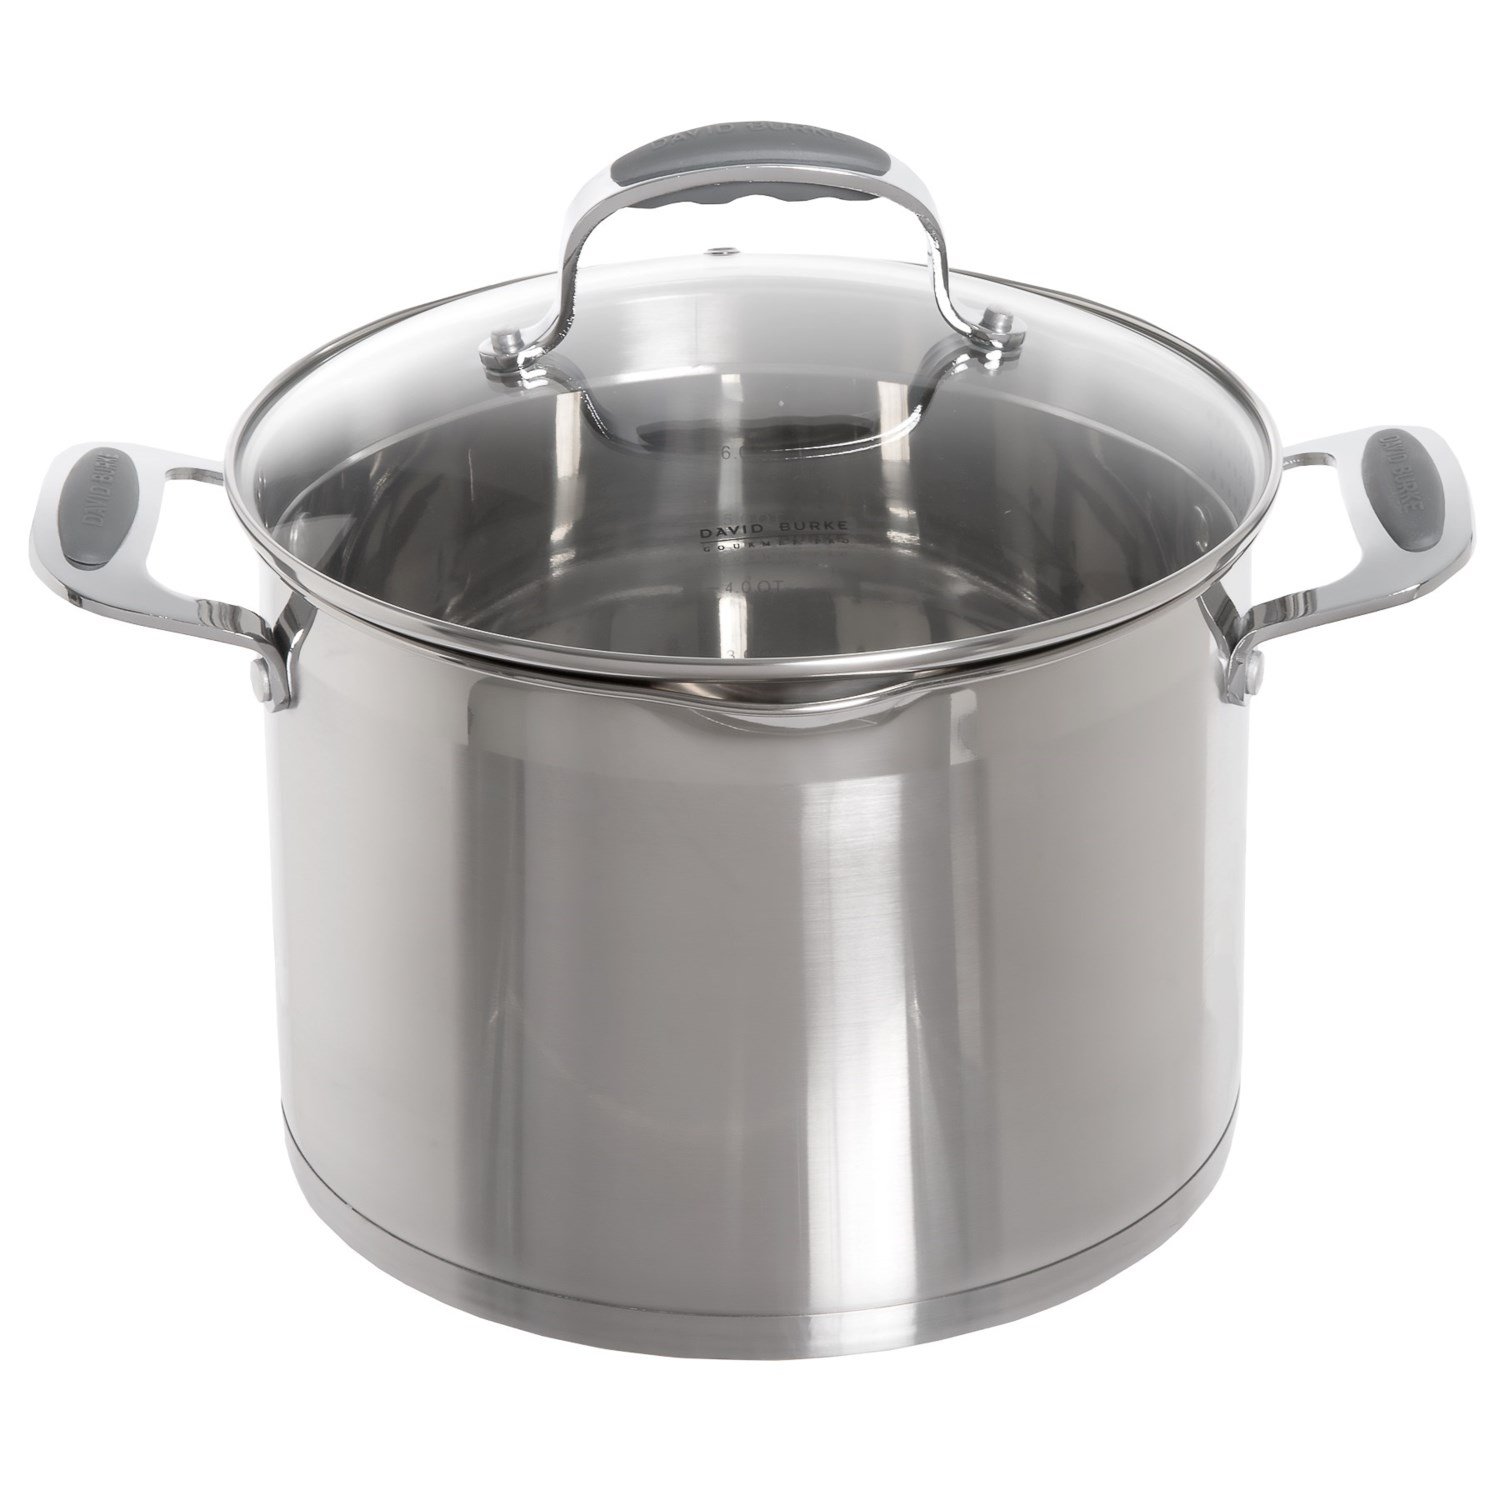 Stainless steel pasta pot with lid and steamer insert. 